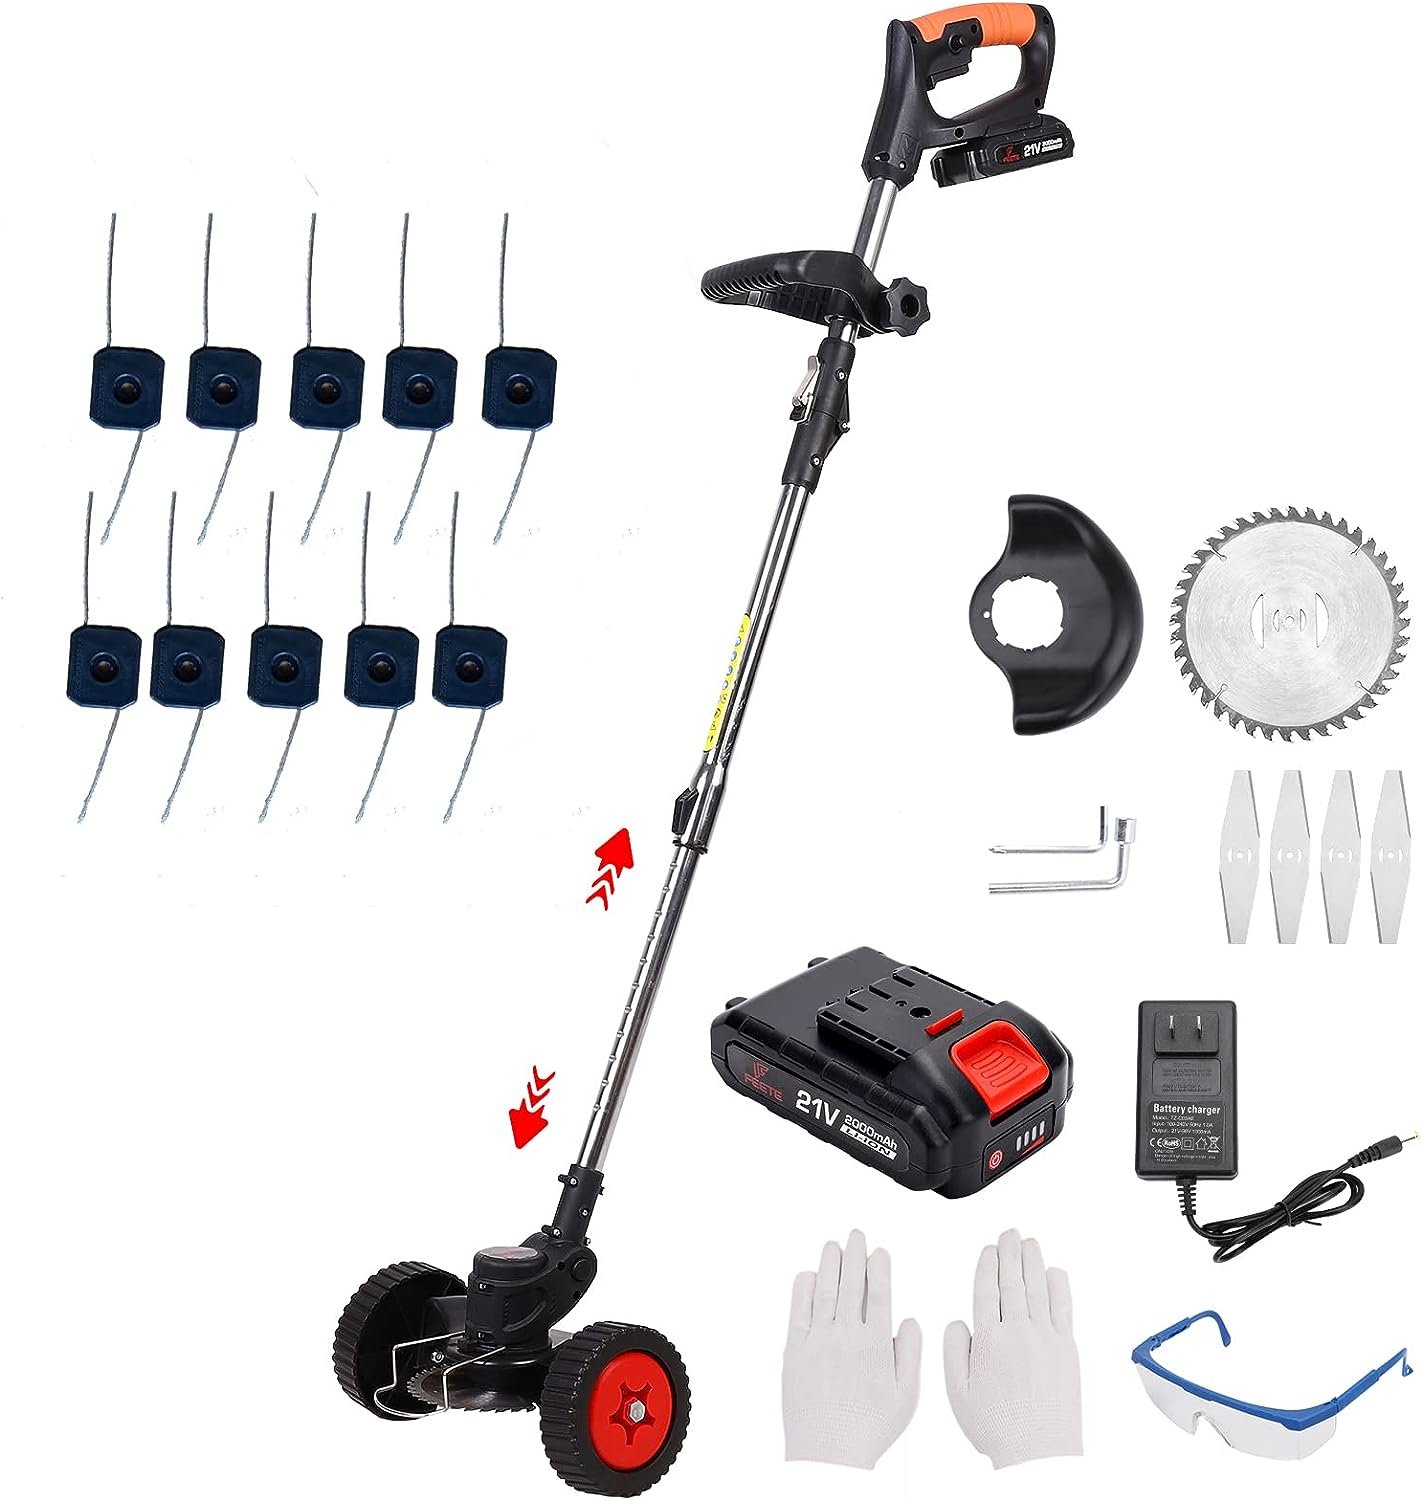 Weed Eater 21V 2Ah Cordless String Trimmer Review